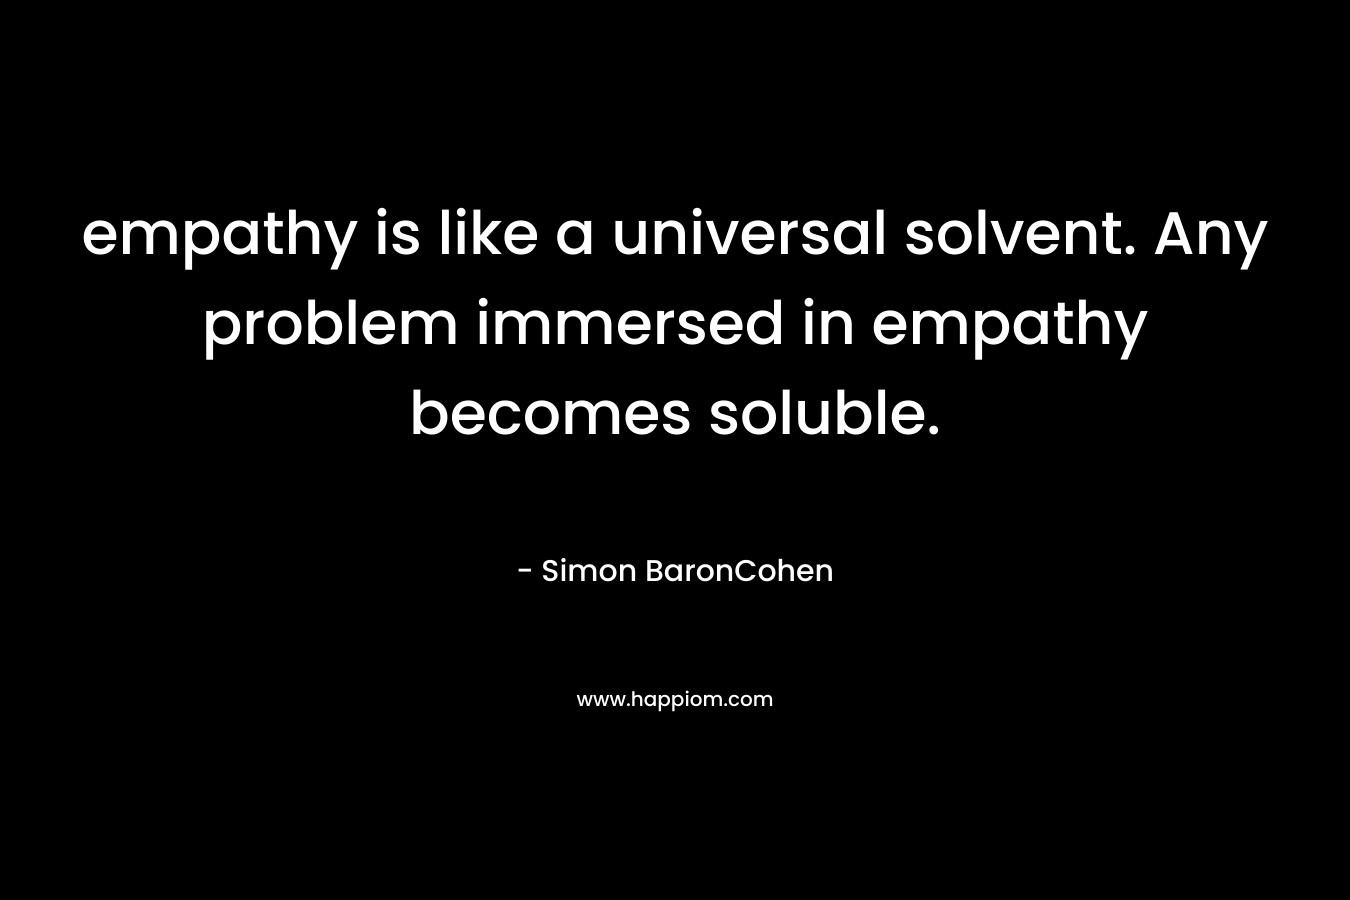 empathy is like a universal solvent. Any problem immersed in empathy becomes soluble. – Simon BaronCohen